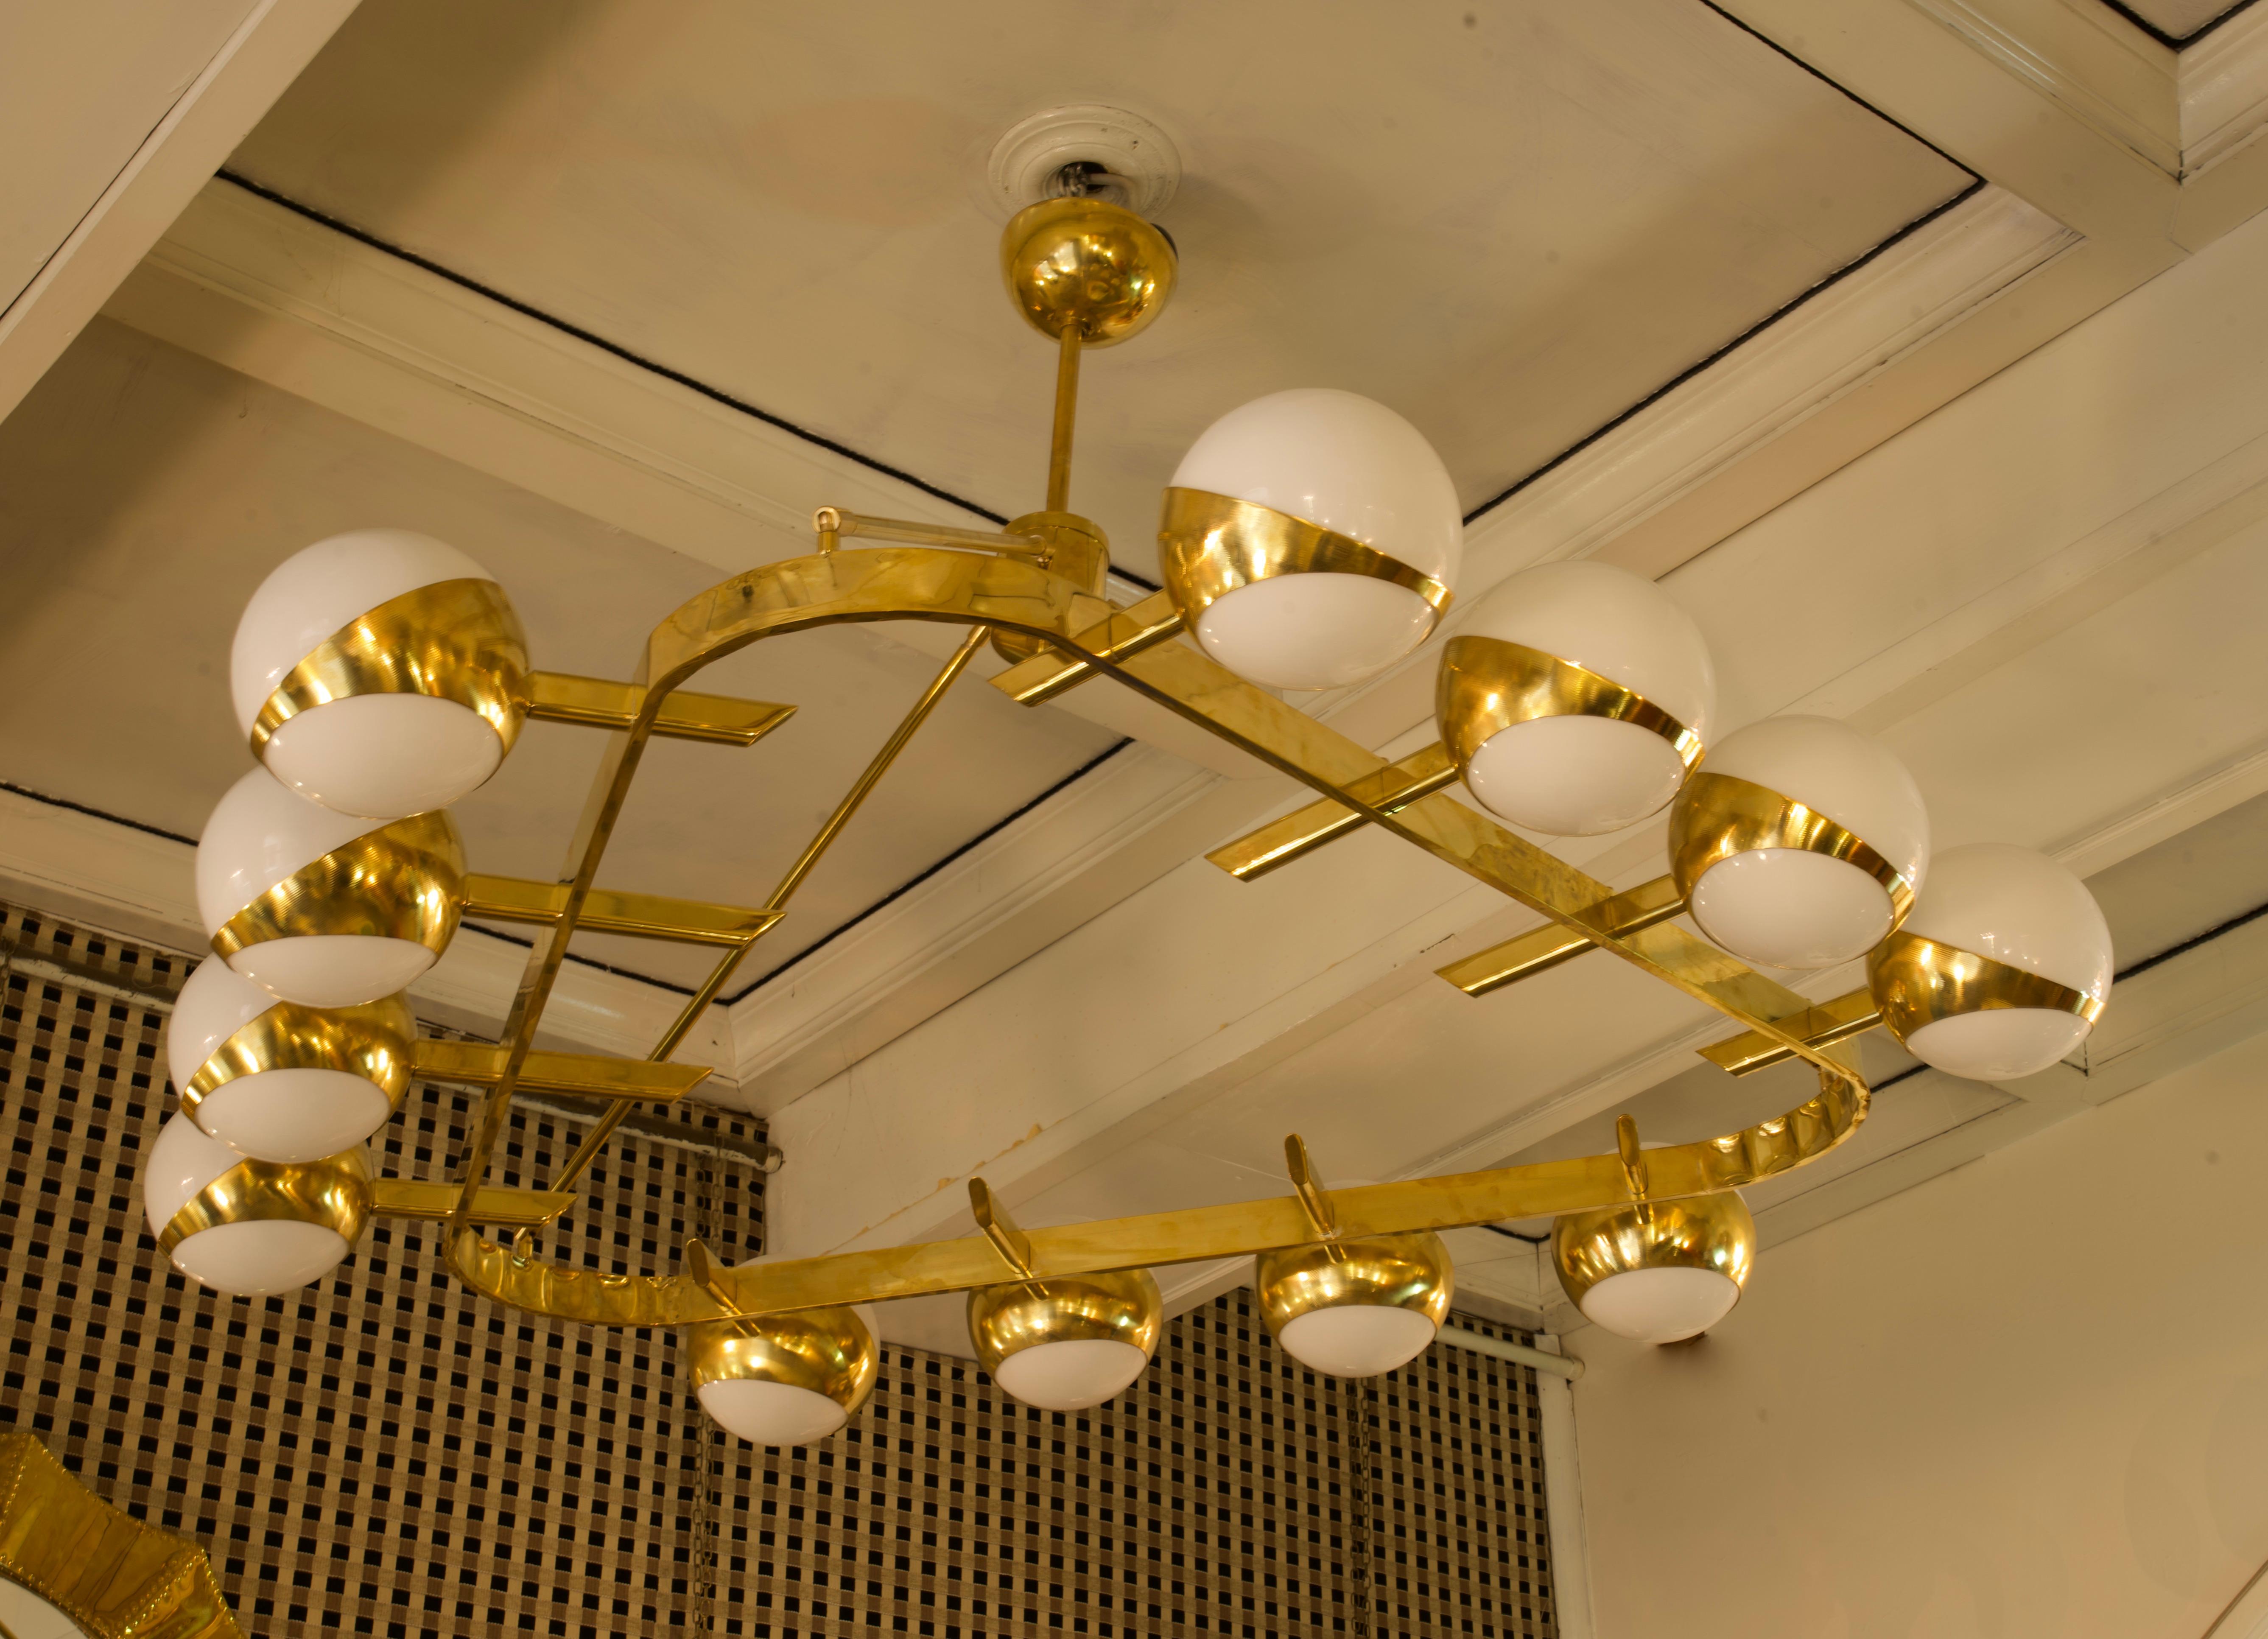 Stunning chandelier for its characteristic triangular structure, unique design for the brass housing of the spheres. Refinement and class as in the Murano style, one-of-a-kind pieces that always remain precious.

The chandelier has a polished brass